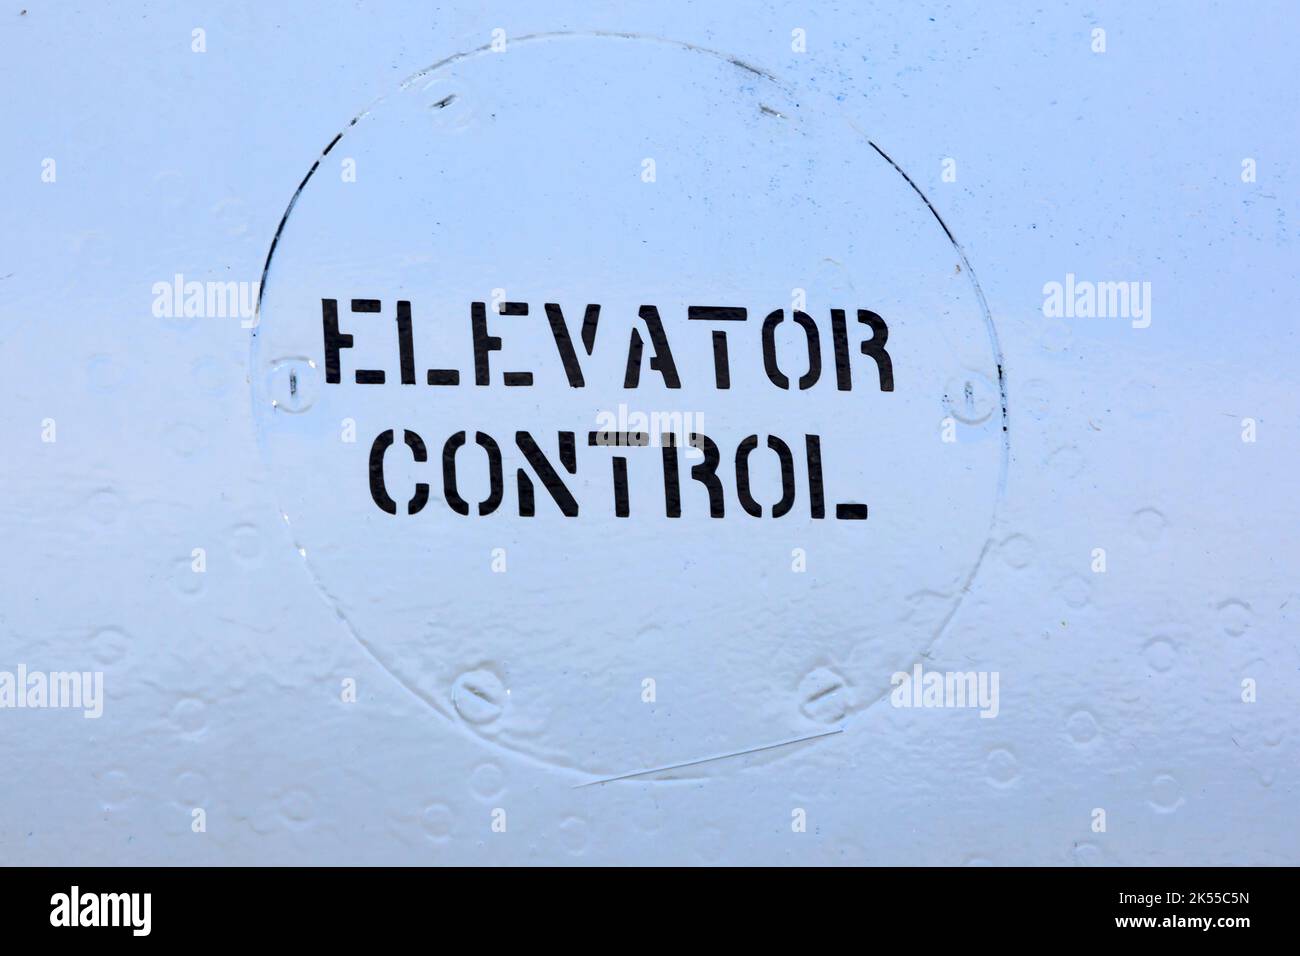 elevator control sign painted on the the side fo an old aircraft Stock Photo